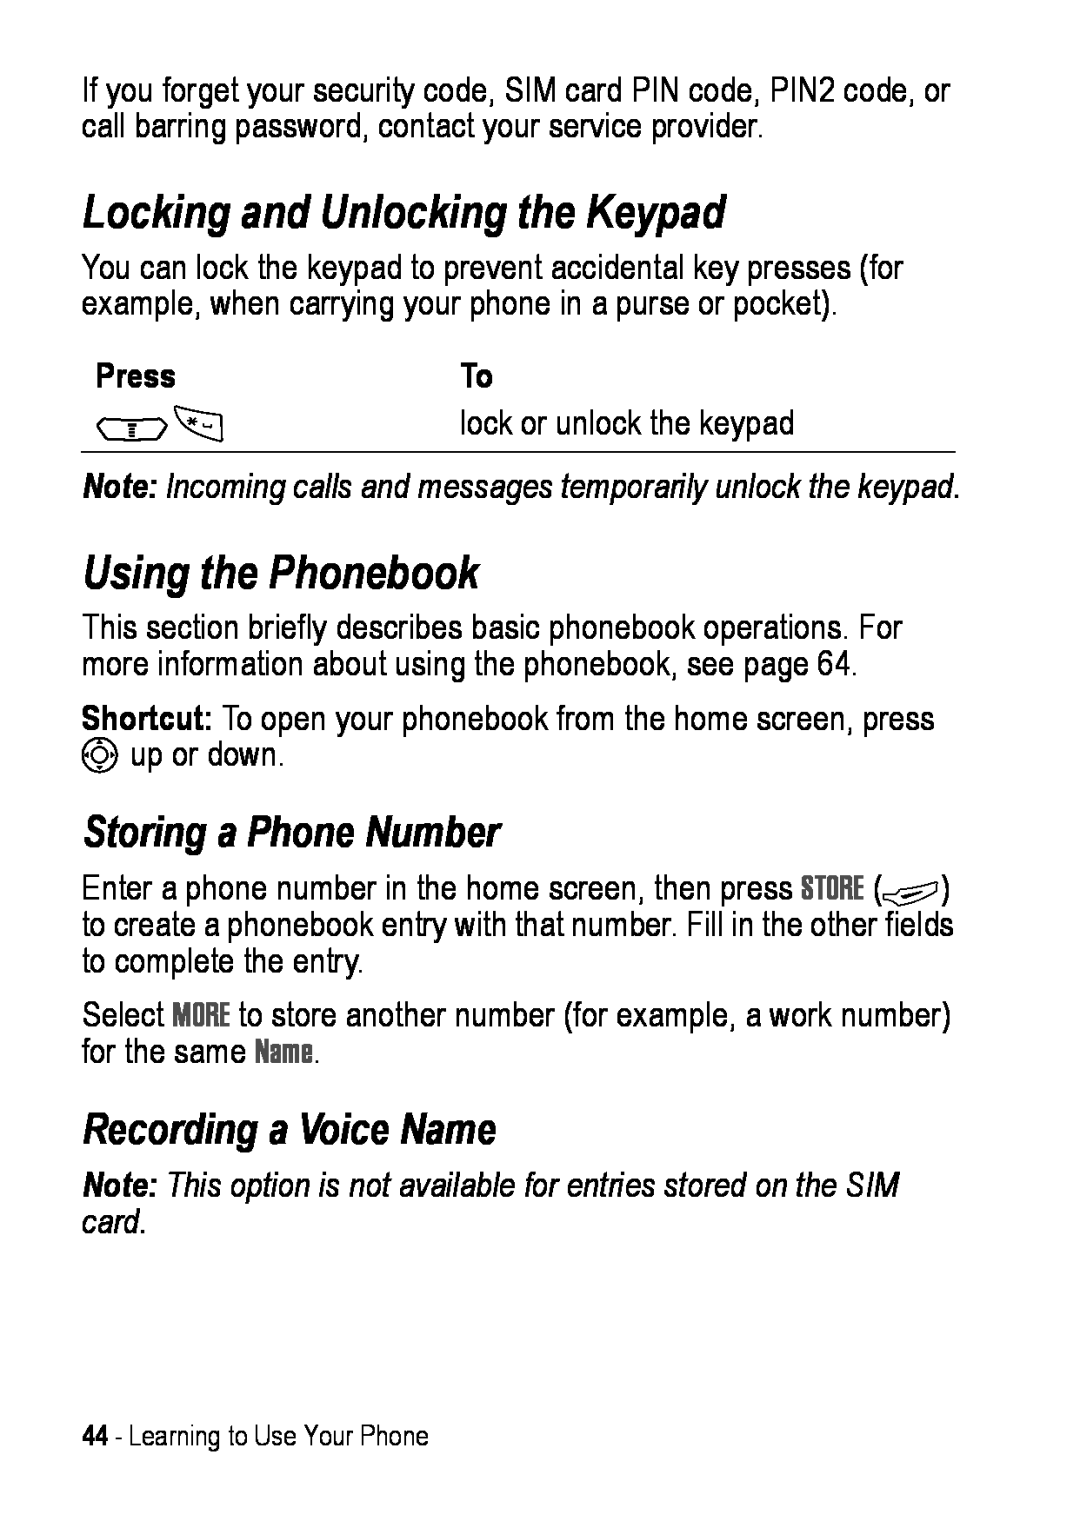 Motorola C390 manual Locking and Unlocking the Keypad, Using the Phonebook, Storing a Phone Number, Recording a Voice Name 